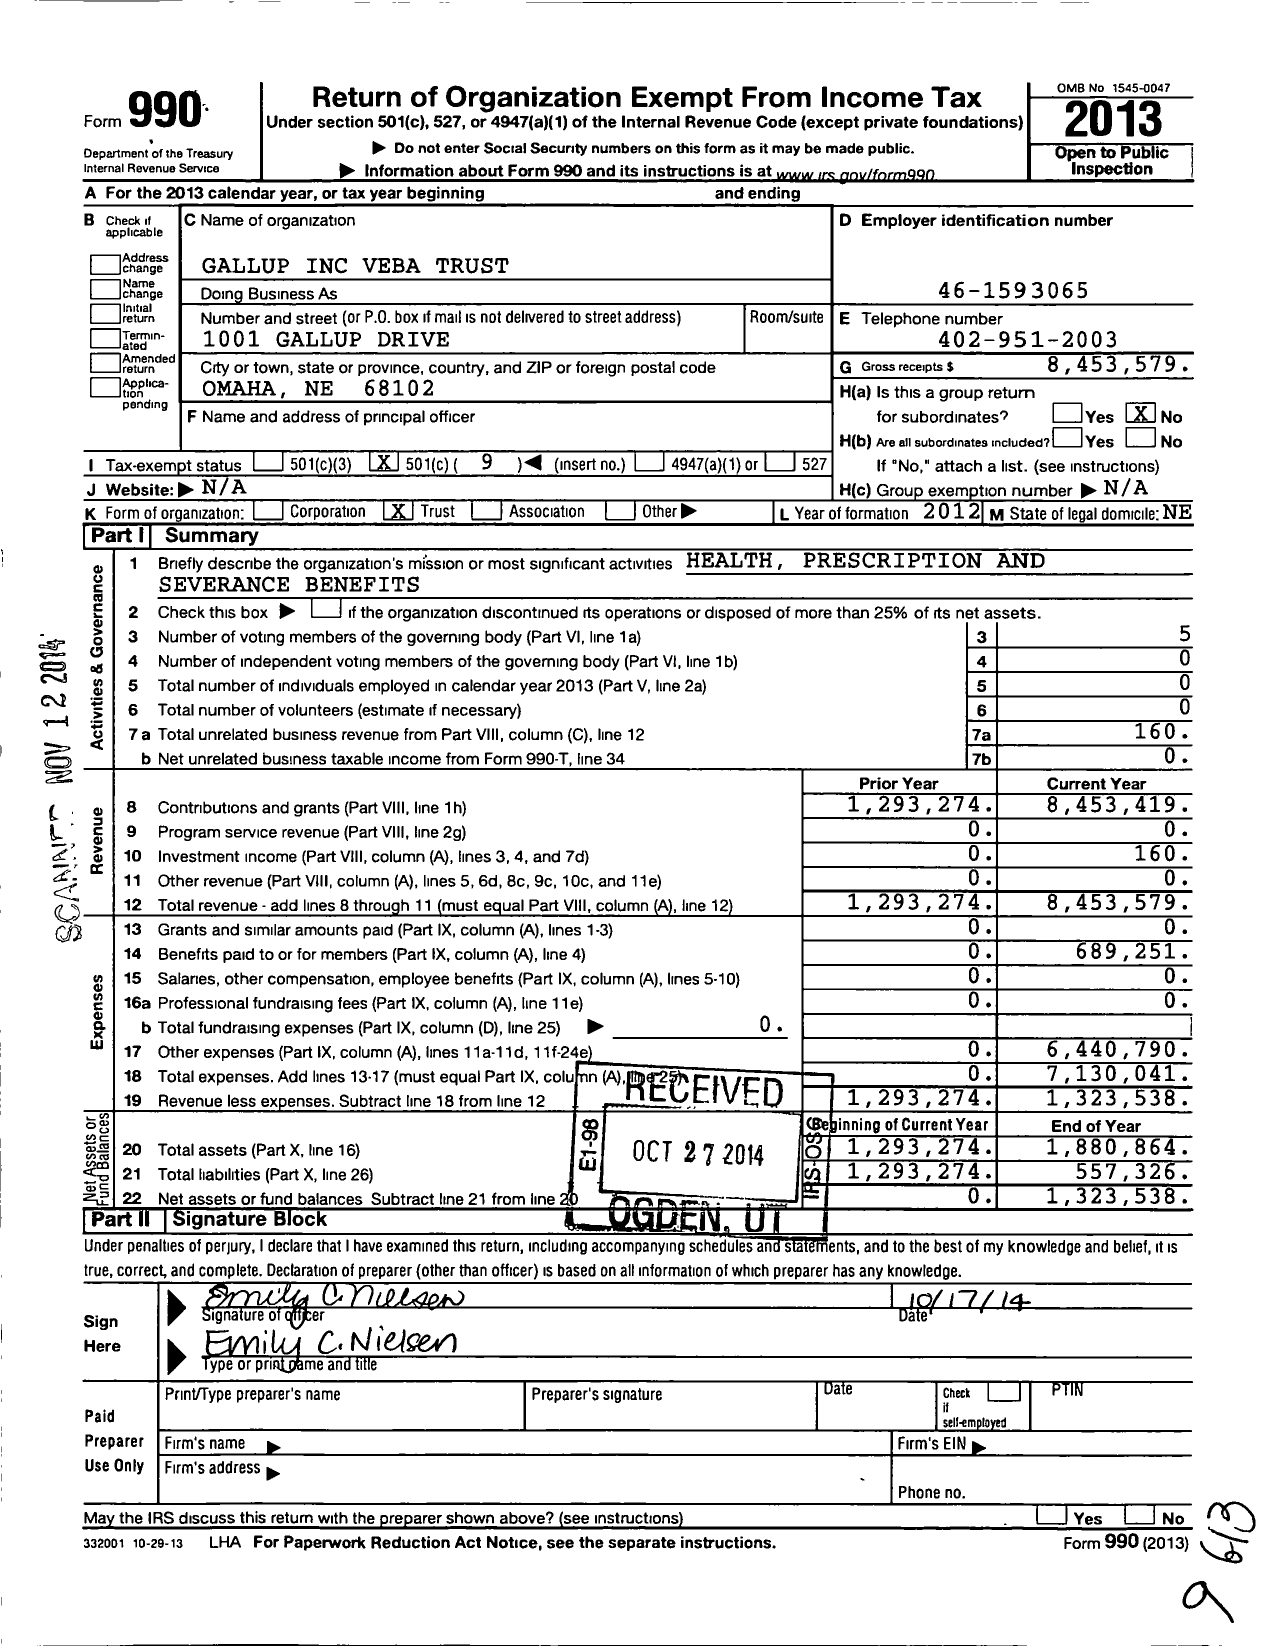 Image of first page of 2013 Form 990O for Gallup Veba Trust